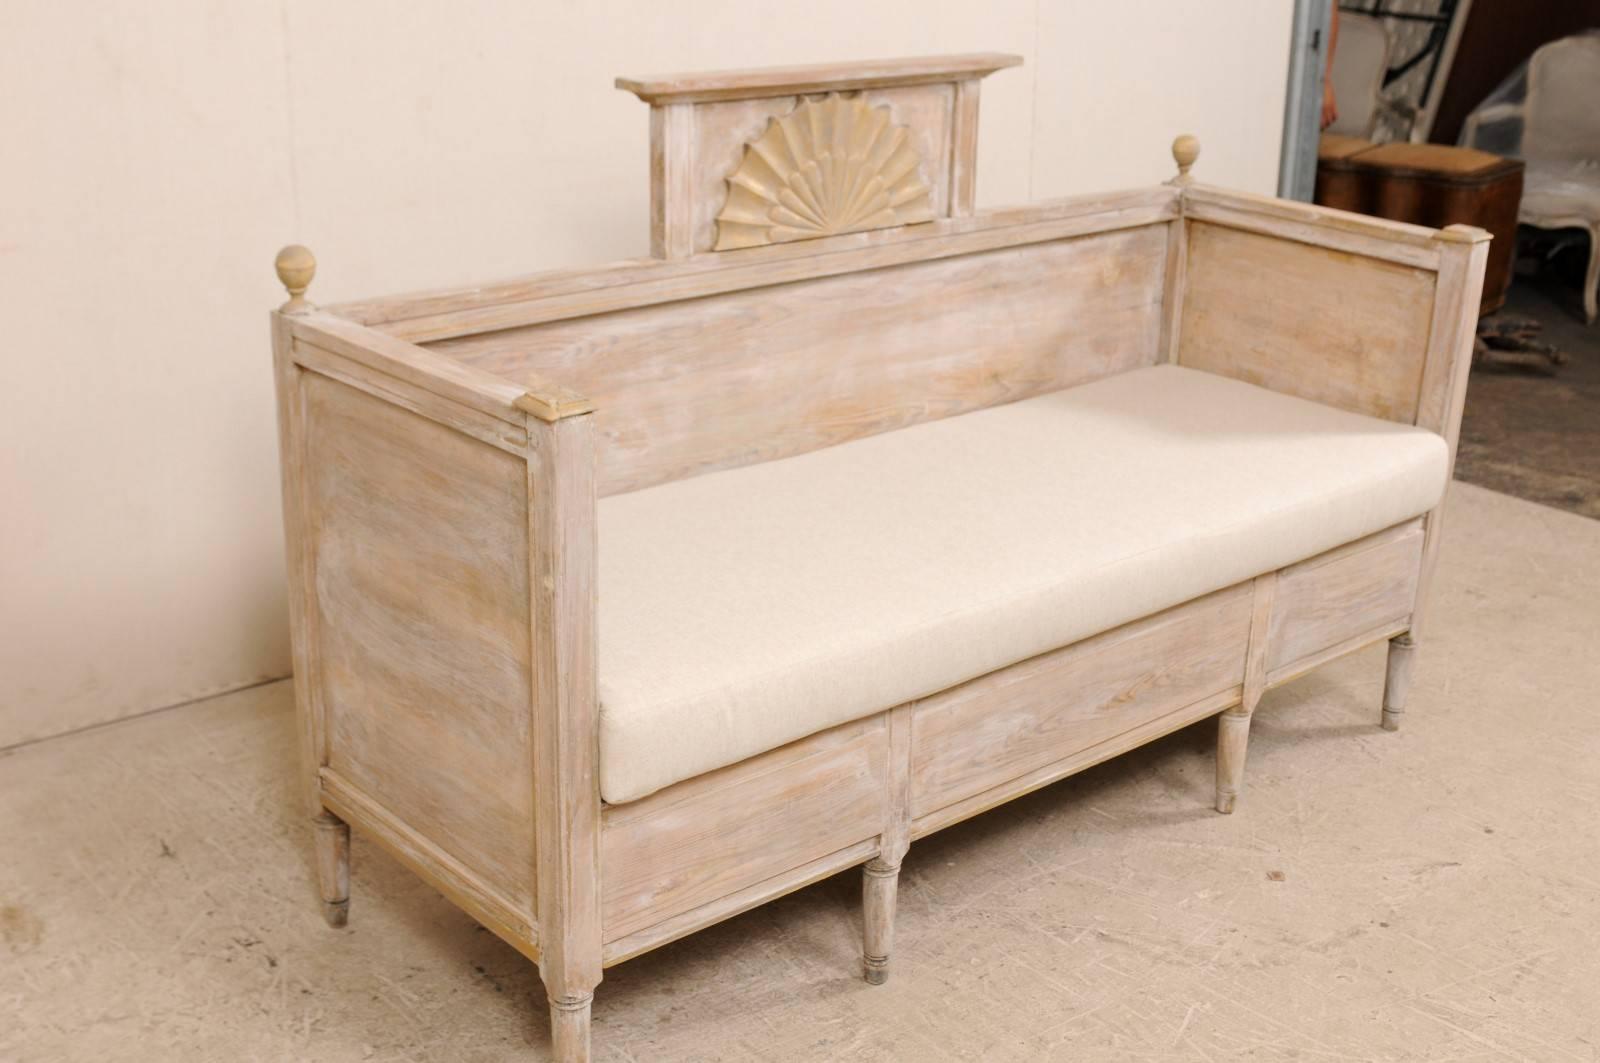 19th Century Early 19th C. Swedish Wooden Sofa Bench w/ Fan-Carved Pediment & Finial Accents